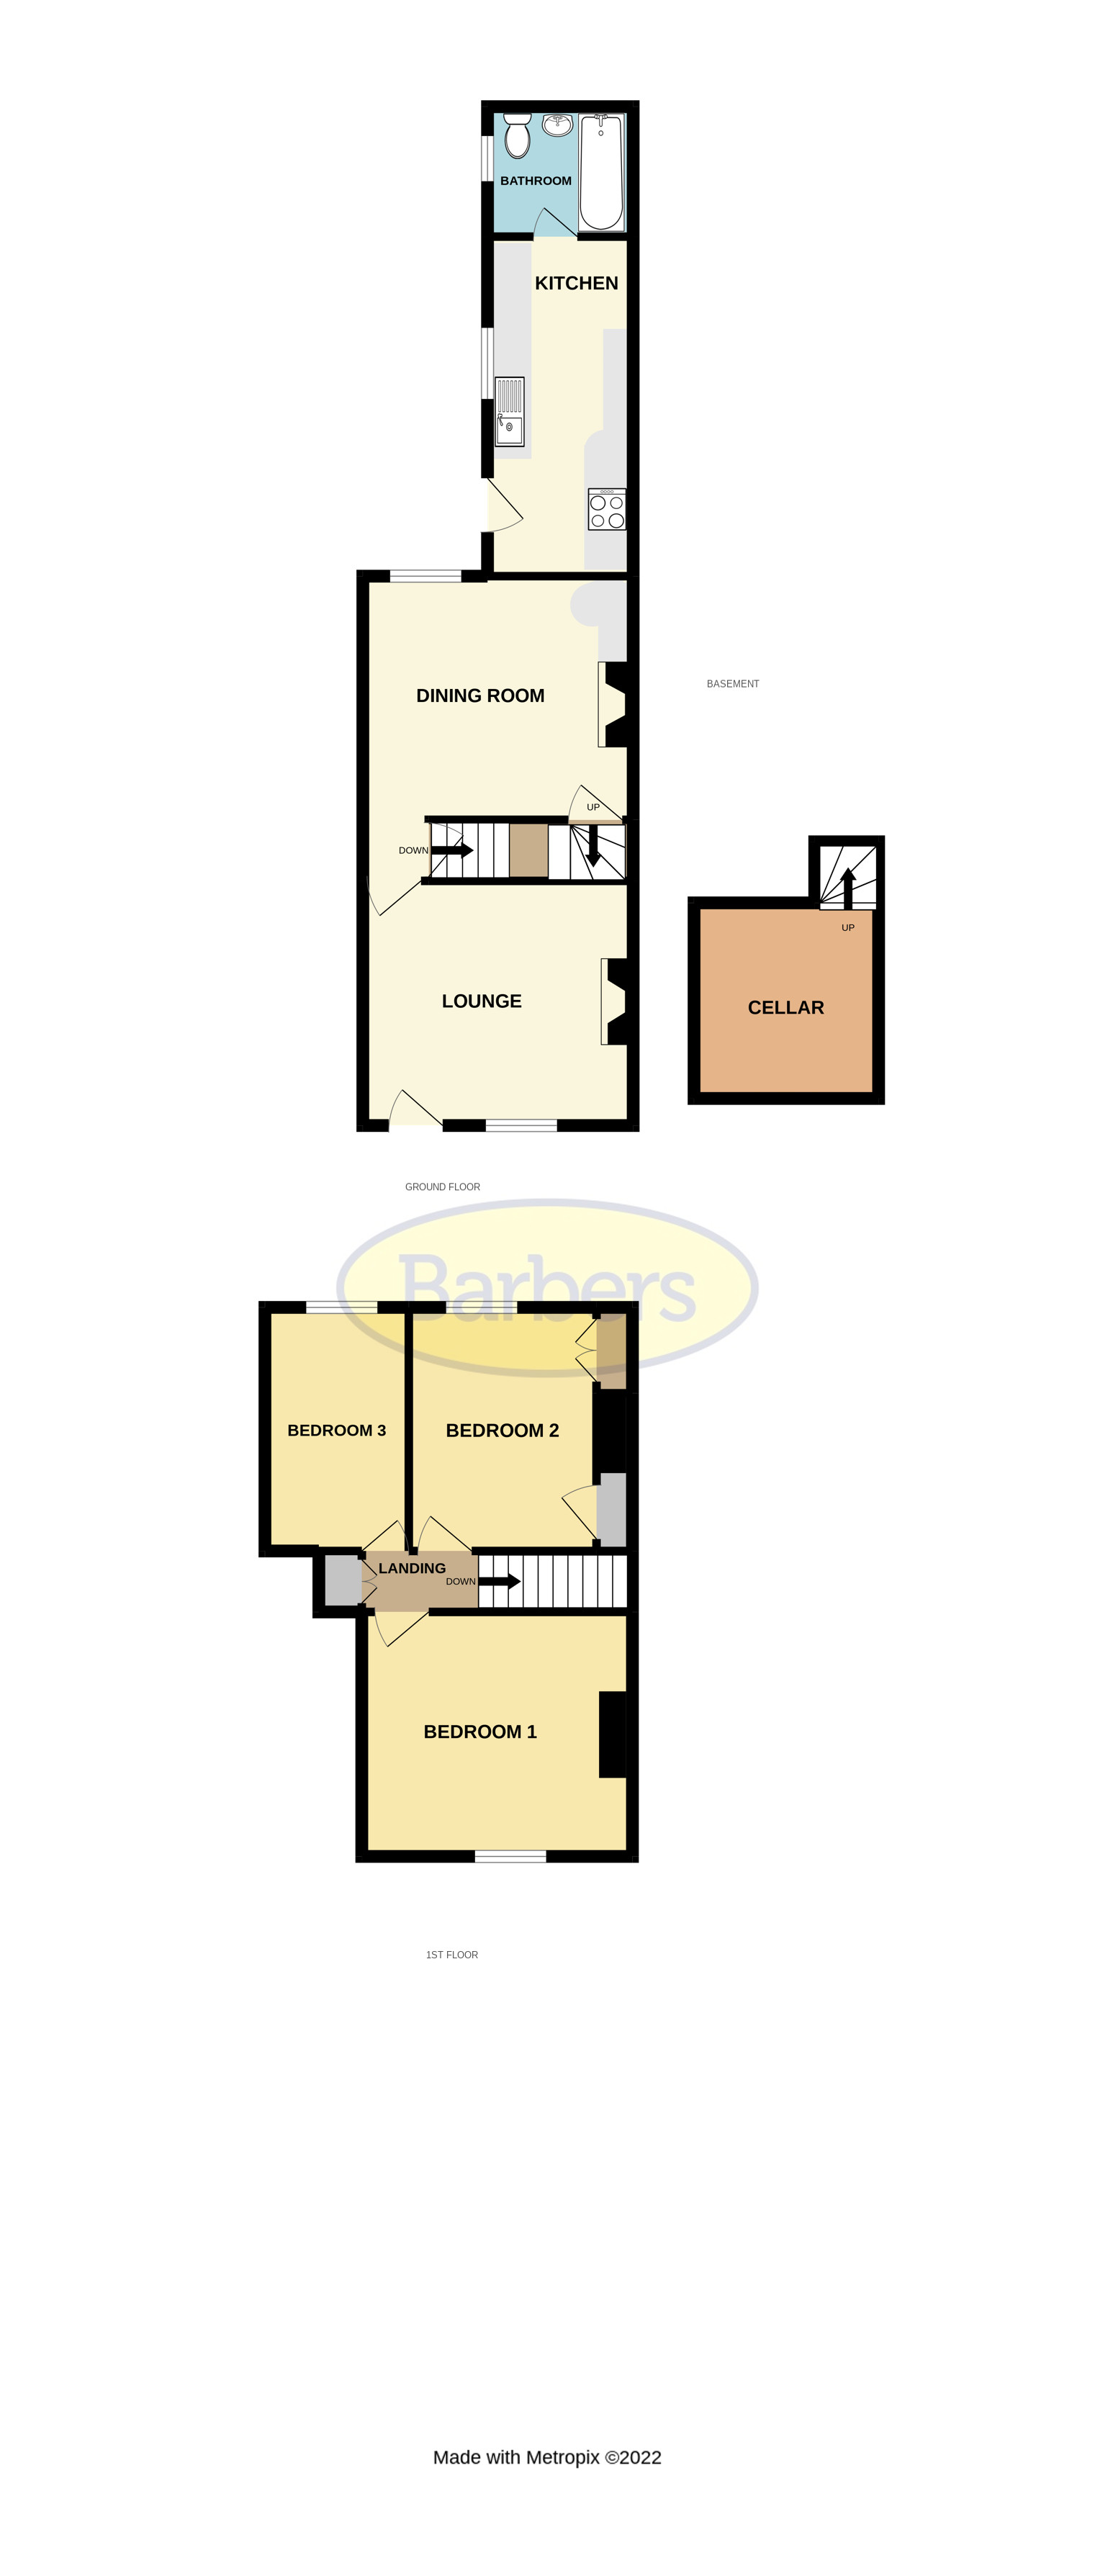 Floorplans For Albion Street, St. Georges, Telford, TF2 9AY